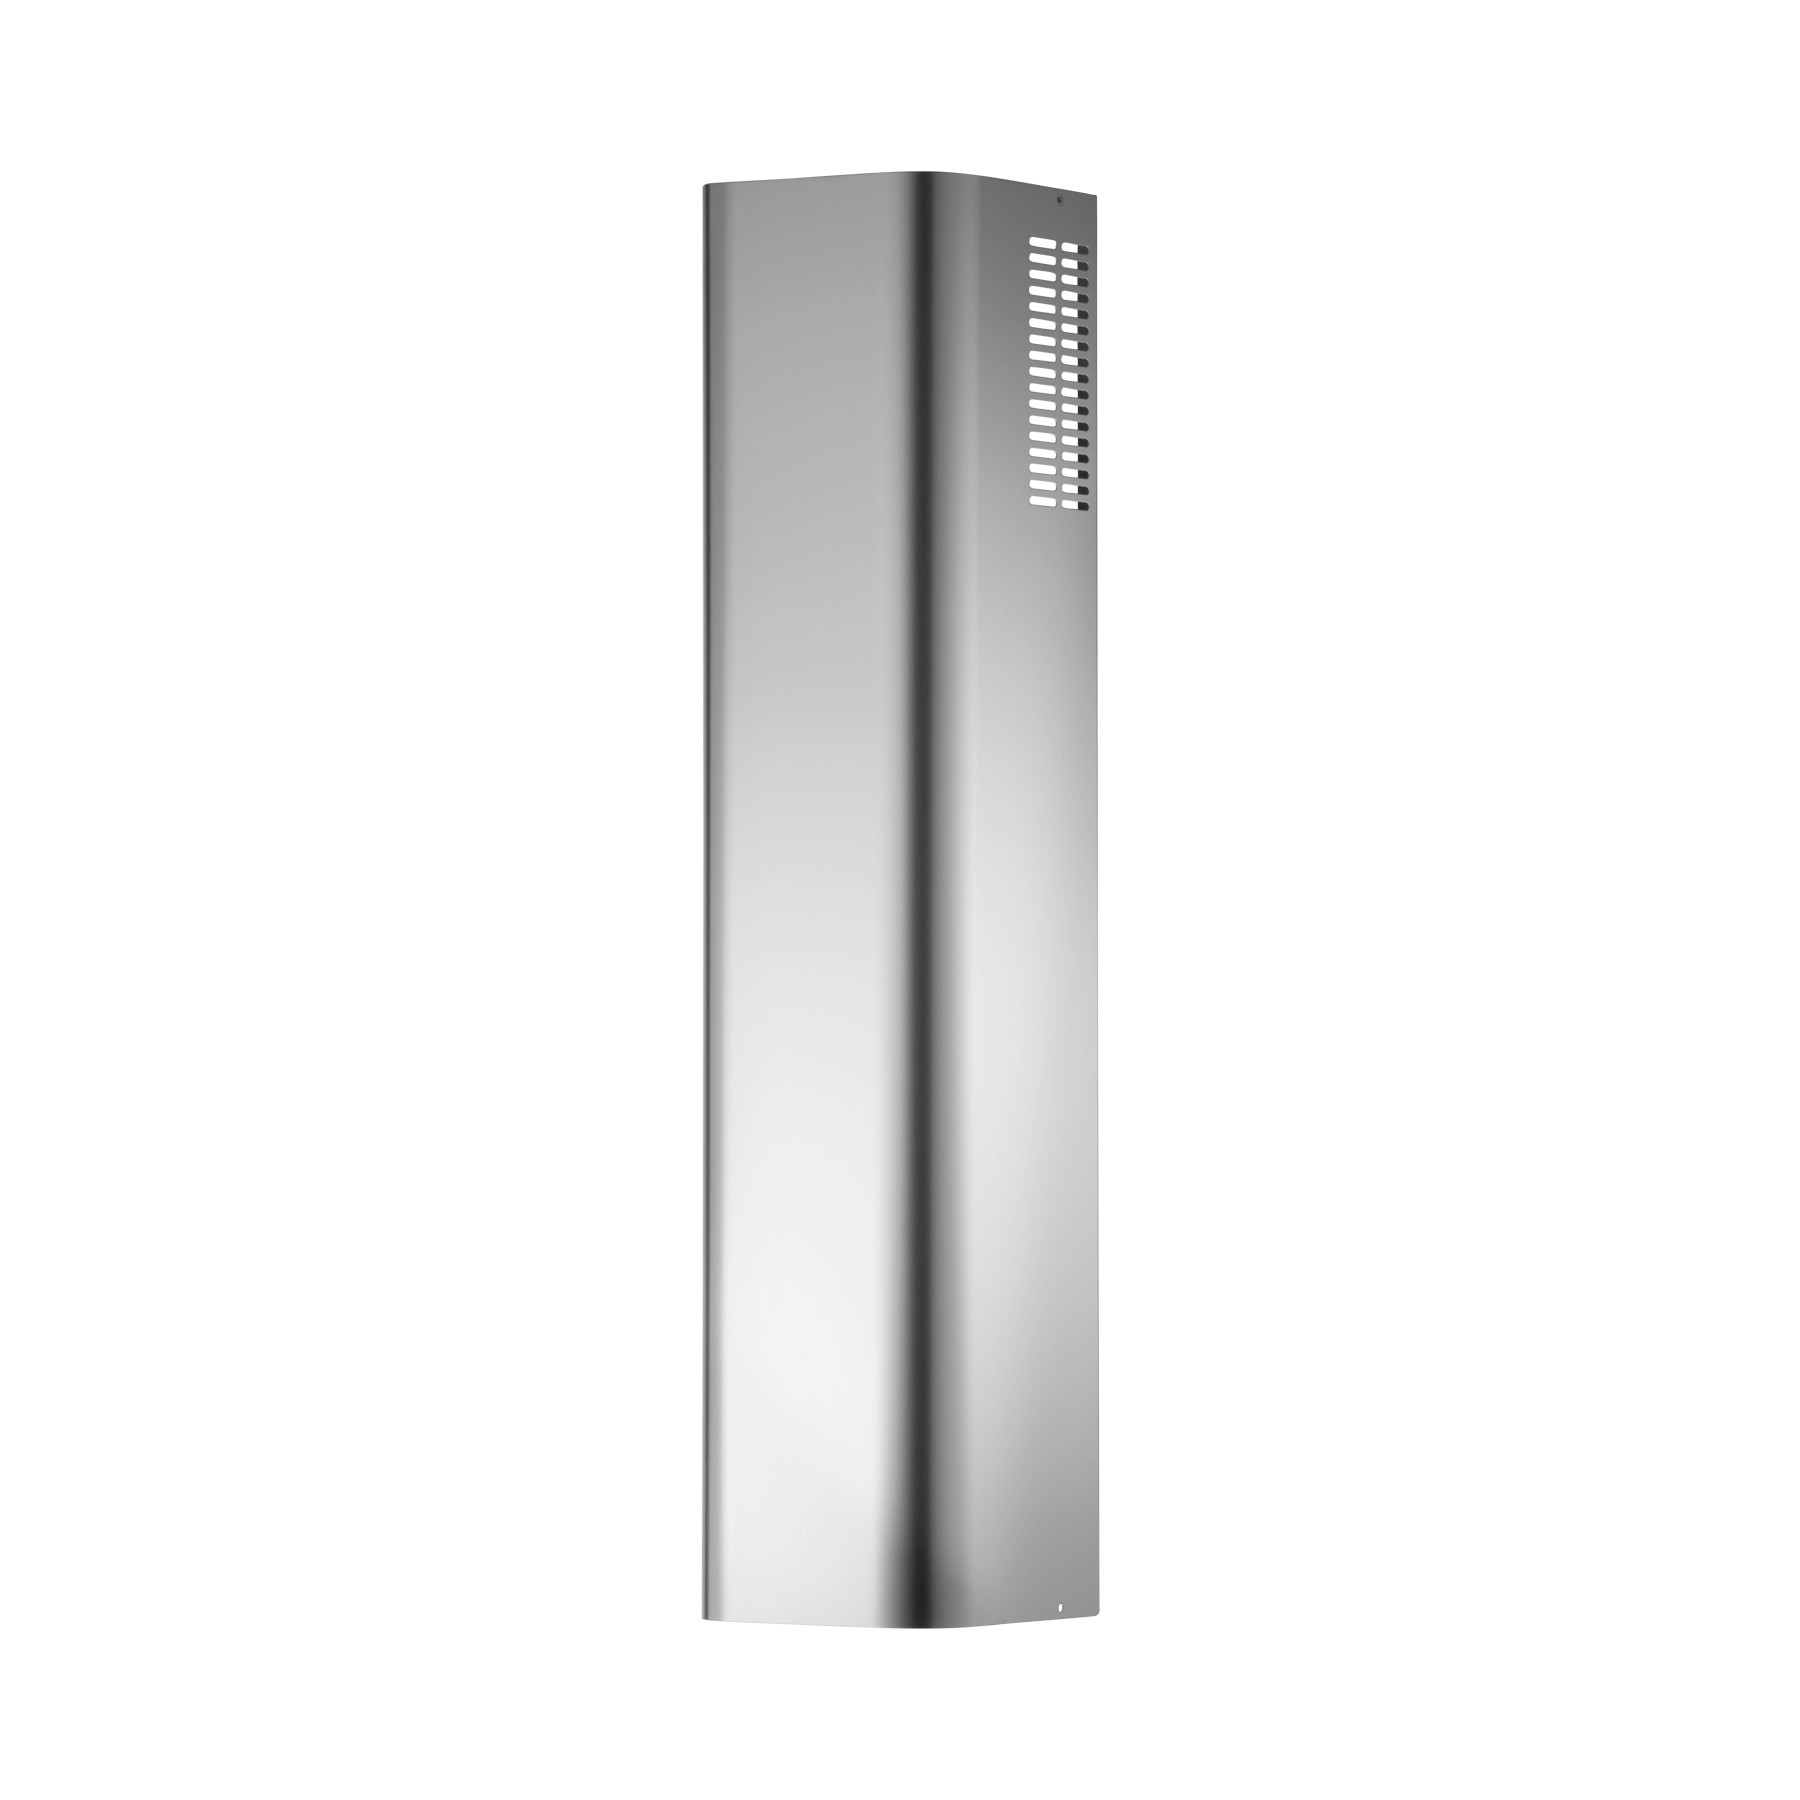 Optional Non-Ducted Flue Extension for RM50000 series range hoods in Stainless Steel